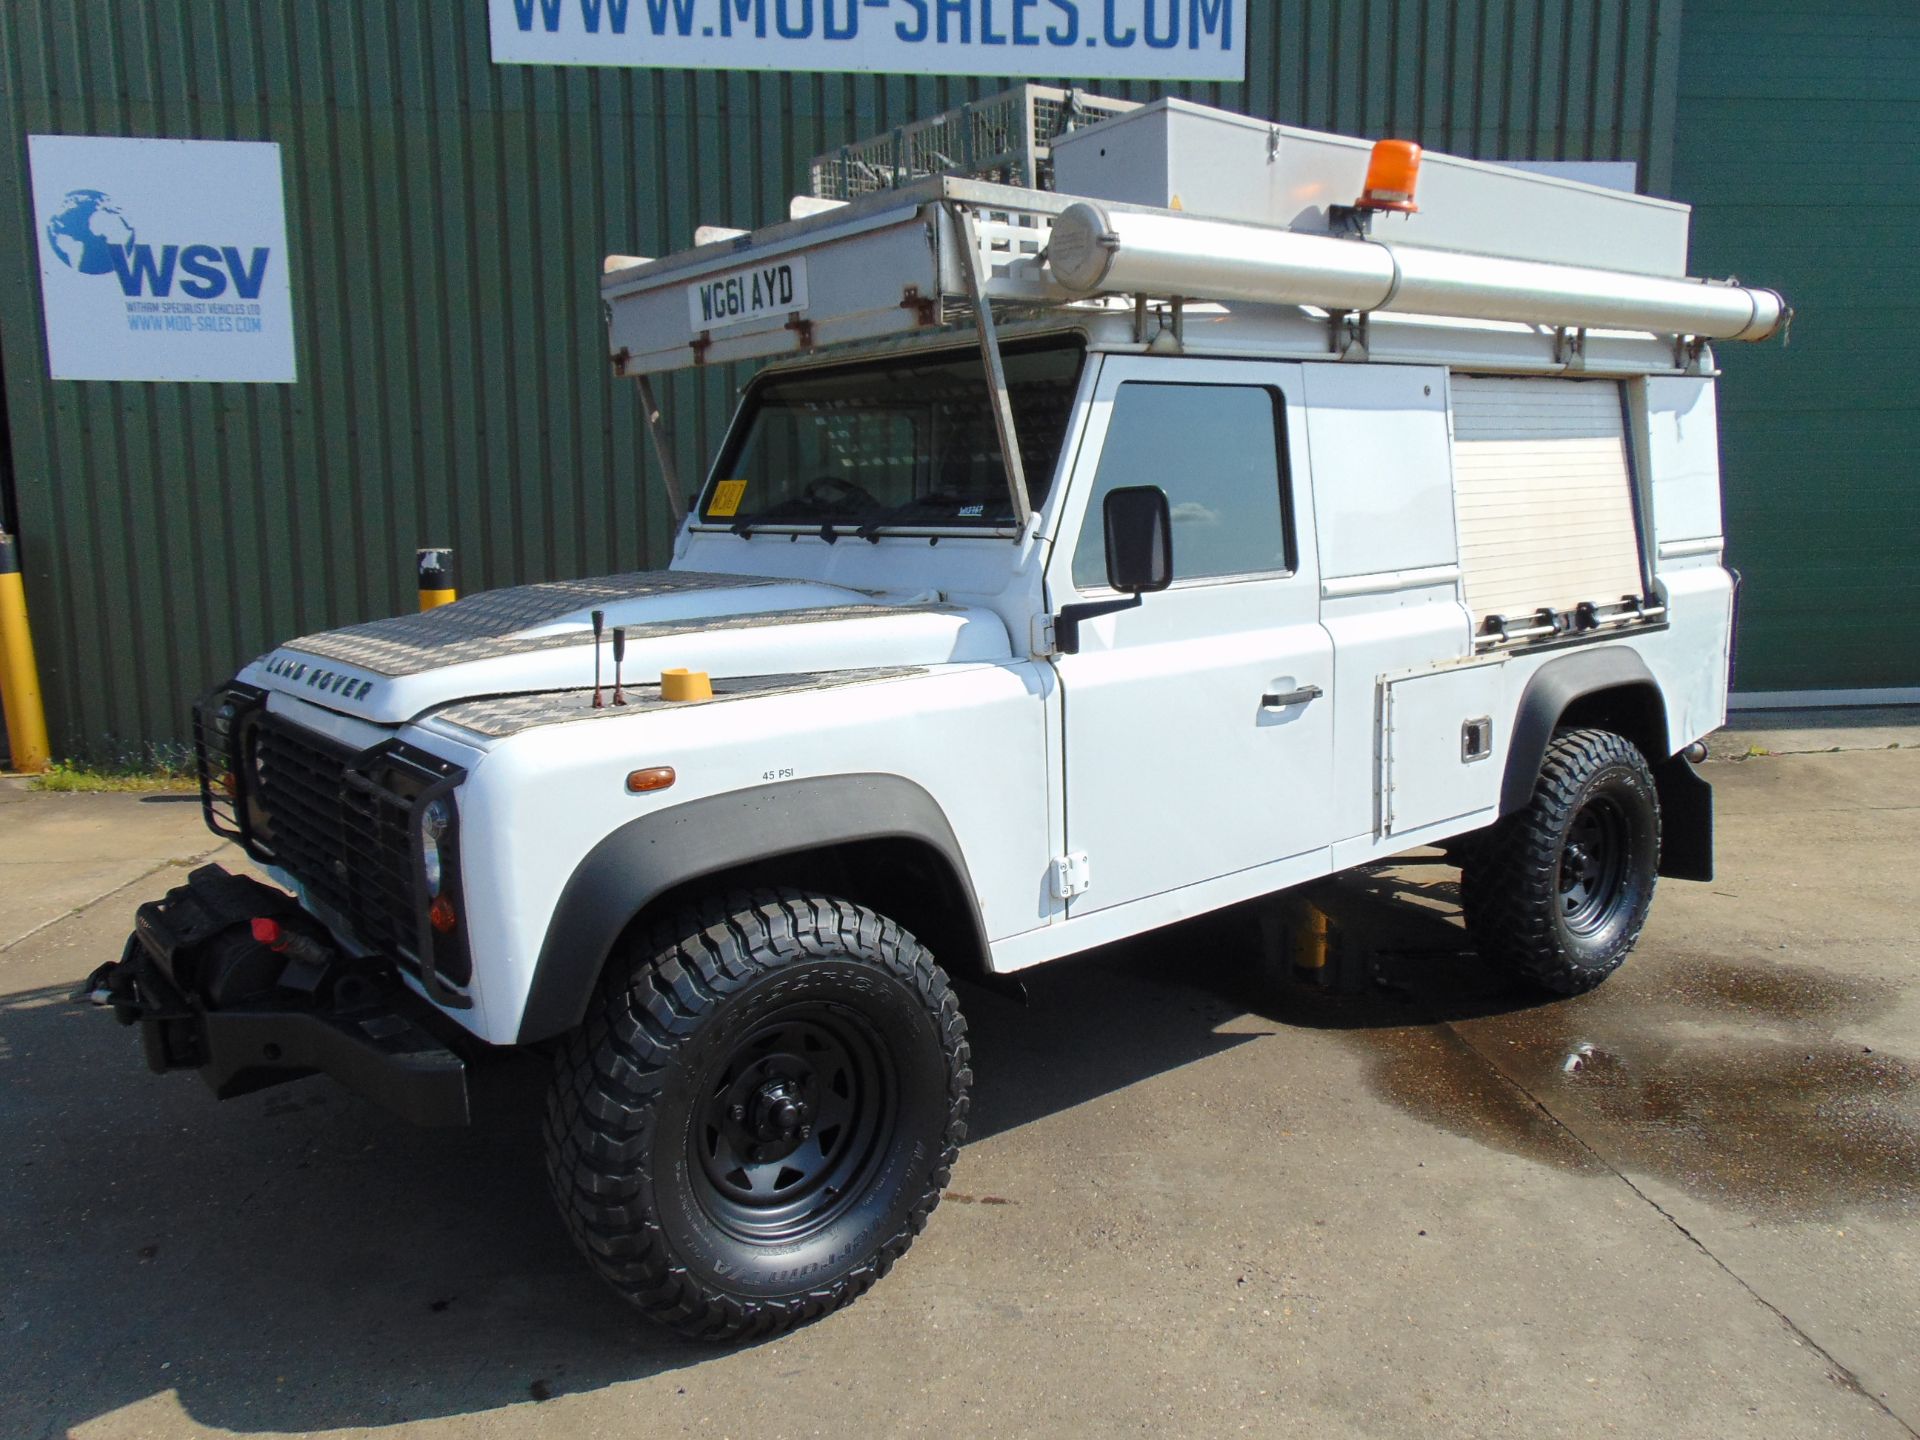 2011 Land Rover Defender 110 Puma hardtop 4x4 Utility vehicle (mobile workshop) with hydraulic winch